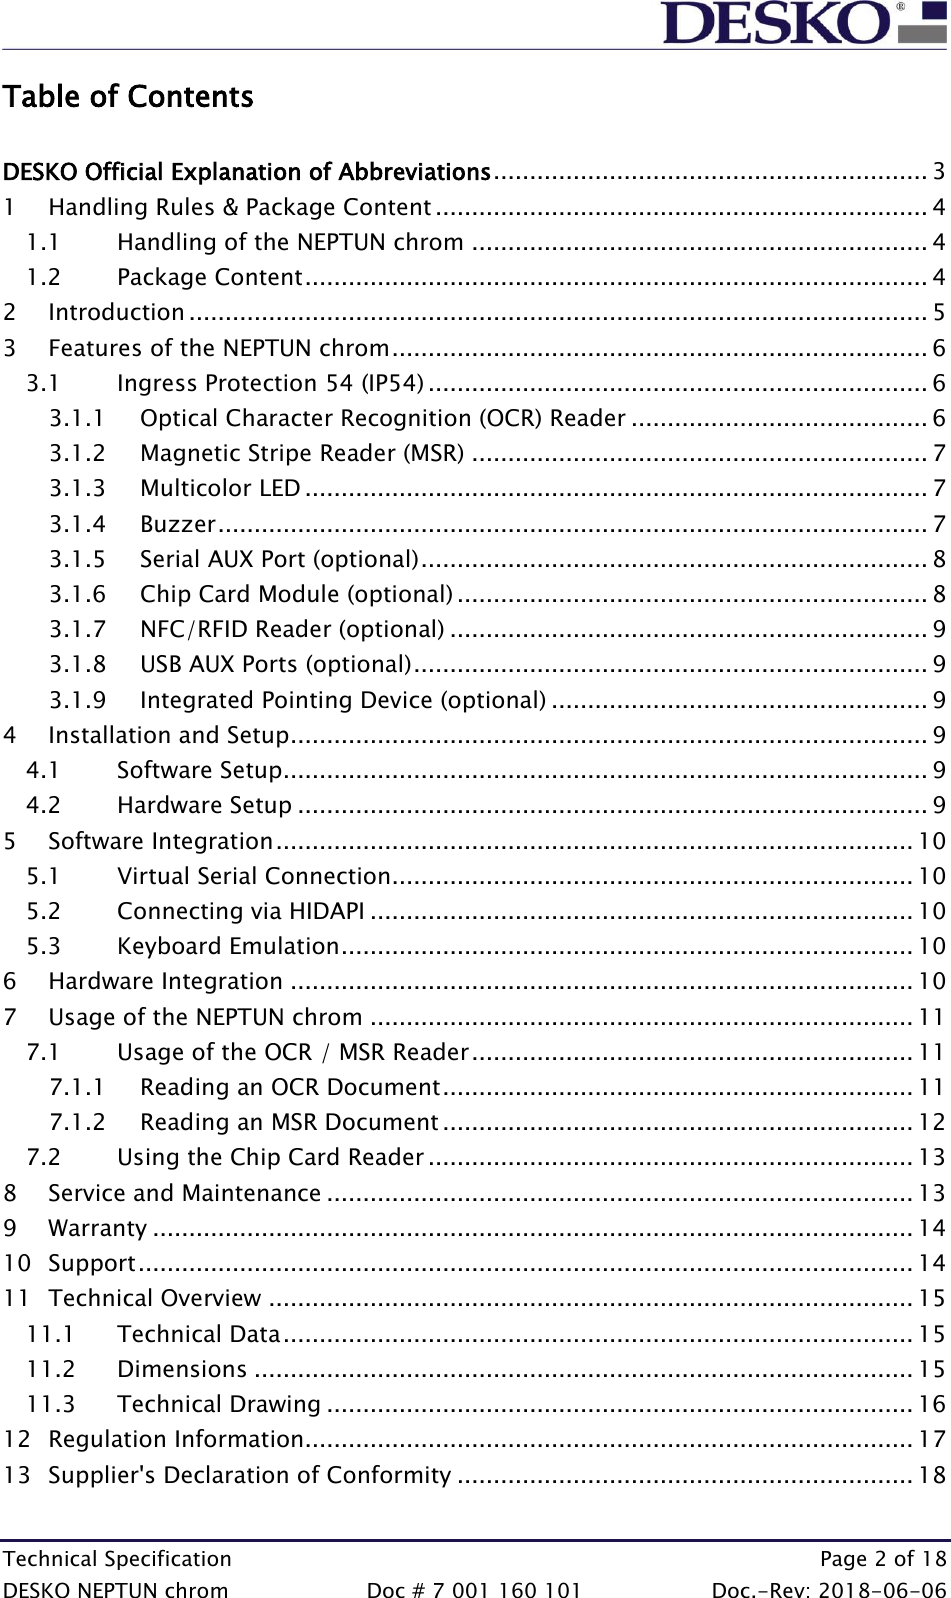  Technical Specification    Page 2 of 18 DESKO NEPTUN chrom  Doc # 7 001 160 101  Doc.-Rev: 2018-06-06 Table of Contents  DESKO Official Explanation of Abbreviations ............................................................ 3 1 Handling Rules &amp; Package Content .................................................................... 4 1.1 Handling of the NEPTUN chrom ............................................................... 4 1.2 Package Content ...................................................................................... 4 2 Introduction ...................................................................................................... 5 3 Features of the NEPTUN chrom .......................................................................... 6 3.1 Ingress Protection 54 (IP54) ..................................................................... 6 3.1.1 Optical Character Recognition (OCR) Reader ......................................... 6 3.1.2 Magnetic Stripe Reader (MSR) ............................................................... 7 3.1.3 Multicolor LED ...................................................................................... 7 3.1.4 Buzzer .................................................................................................. 7 3.1.5 Serial AUX Port (optional) ...................................................................... 8 3.1.6 Chip Card Module (optional) ................................................................. 8 3.1.7 NFC/RFID Reader (optional) .................................................................. 9 3.1.8 USB AUX Ports (optional) ....................................................................... 9 3.1.9 Integrated Pointing Device (optional) .................................................... 9 4 Installation and Setup ........................................................................................ 9 4.1 Software Setup ......................................................................................... 9 4.2 Hardware Setup ....................................................................................... 9 5 Software Integration ........................................................................................ 10 5.1 Virtual Serial Connection ........................................................................ 10 5.2 Connecting via HIDAPI ........................................................................... 10 5.3 Keyboard Emulation ............................................................................... 10 6 Hardware Integration ...................................................................................... 10 7 Usage of the NEPTUN chrom ........................................................................... 11 7.1 Usage of the OCR / MSR Reader ............................................................. 11 7.1.1 Reading an OCR Document ................................................................. 11 7.1.2 Reading an MSR Document ................................................................. 12 7.2 Using the Chip Card Reader ................................................................... 13 8 Service and Maintenance ................................................................................. 13 9 Warranty ......................................................................................................... 14 10 Support ........................................................................................................... 14 11 Technical Overview ......................................................................................... 15 11.1 Technical Data ....................................................................................... 15 11.2 Dimensions ........................................................................................... 15 11.3 Technical Drawing ................................................................................. 16 12 Regulation Information .................................................................................... 17 13 Supplier&apos;s Declaration of Conformity ............................................................... 18  